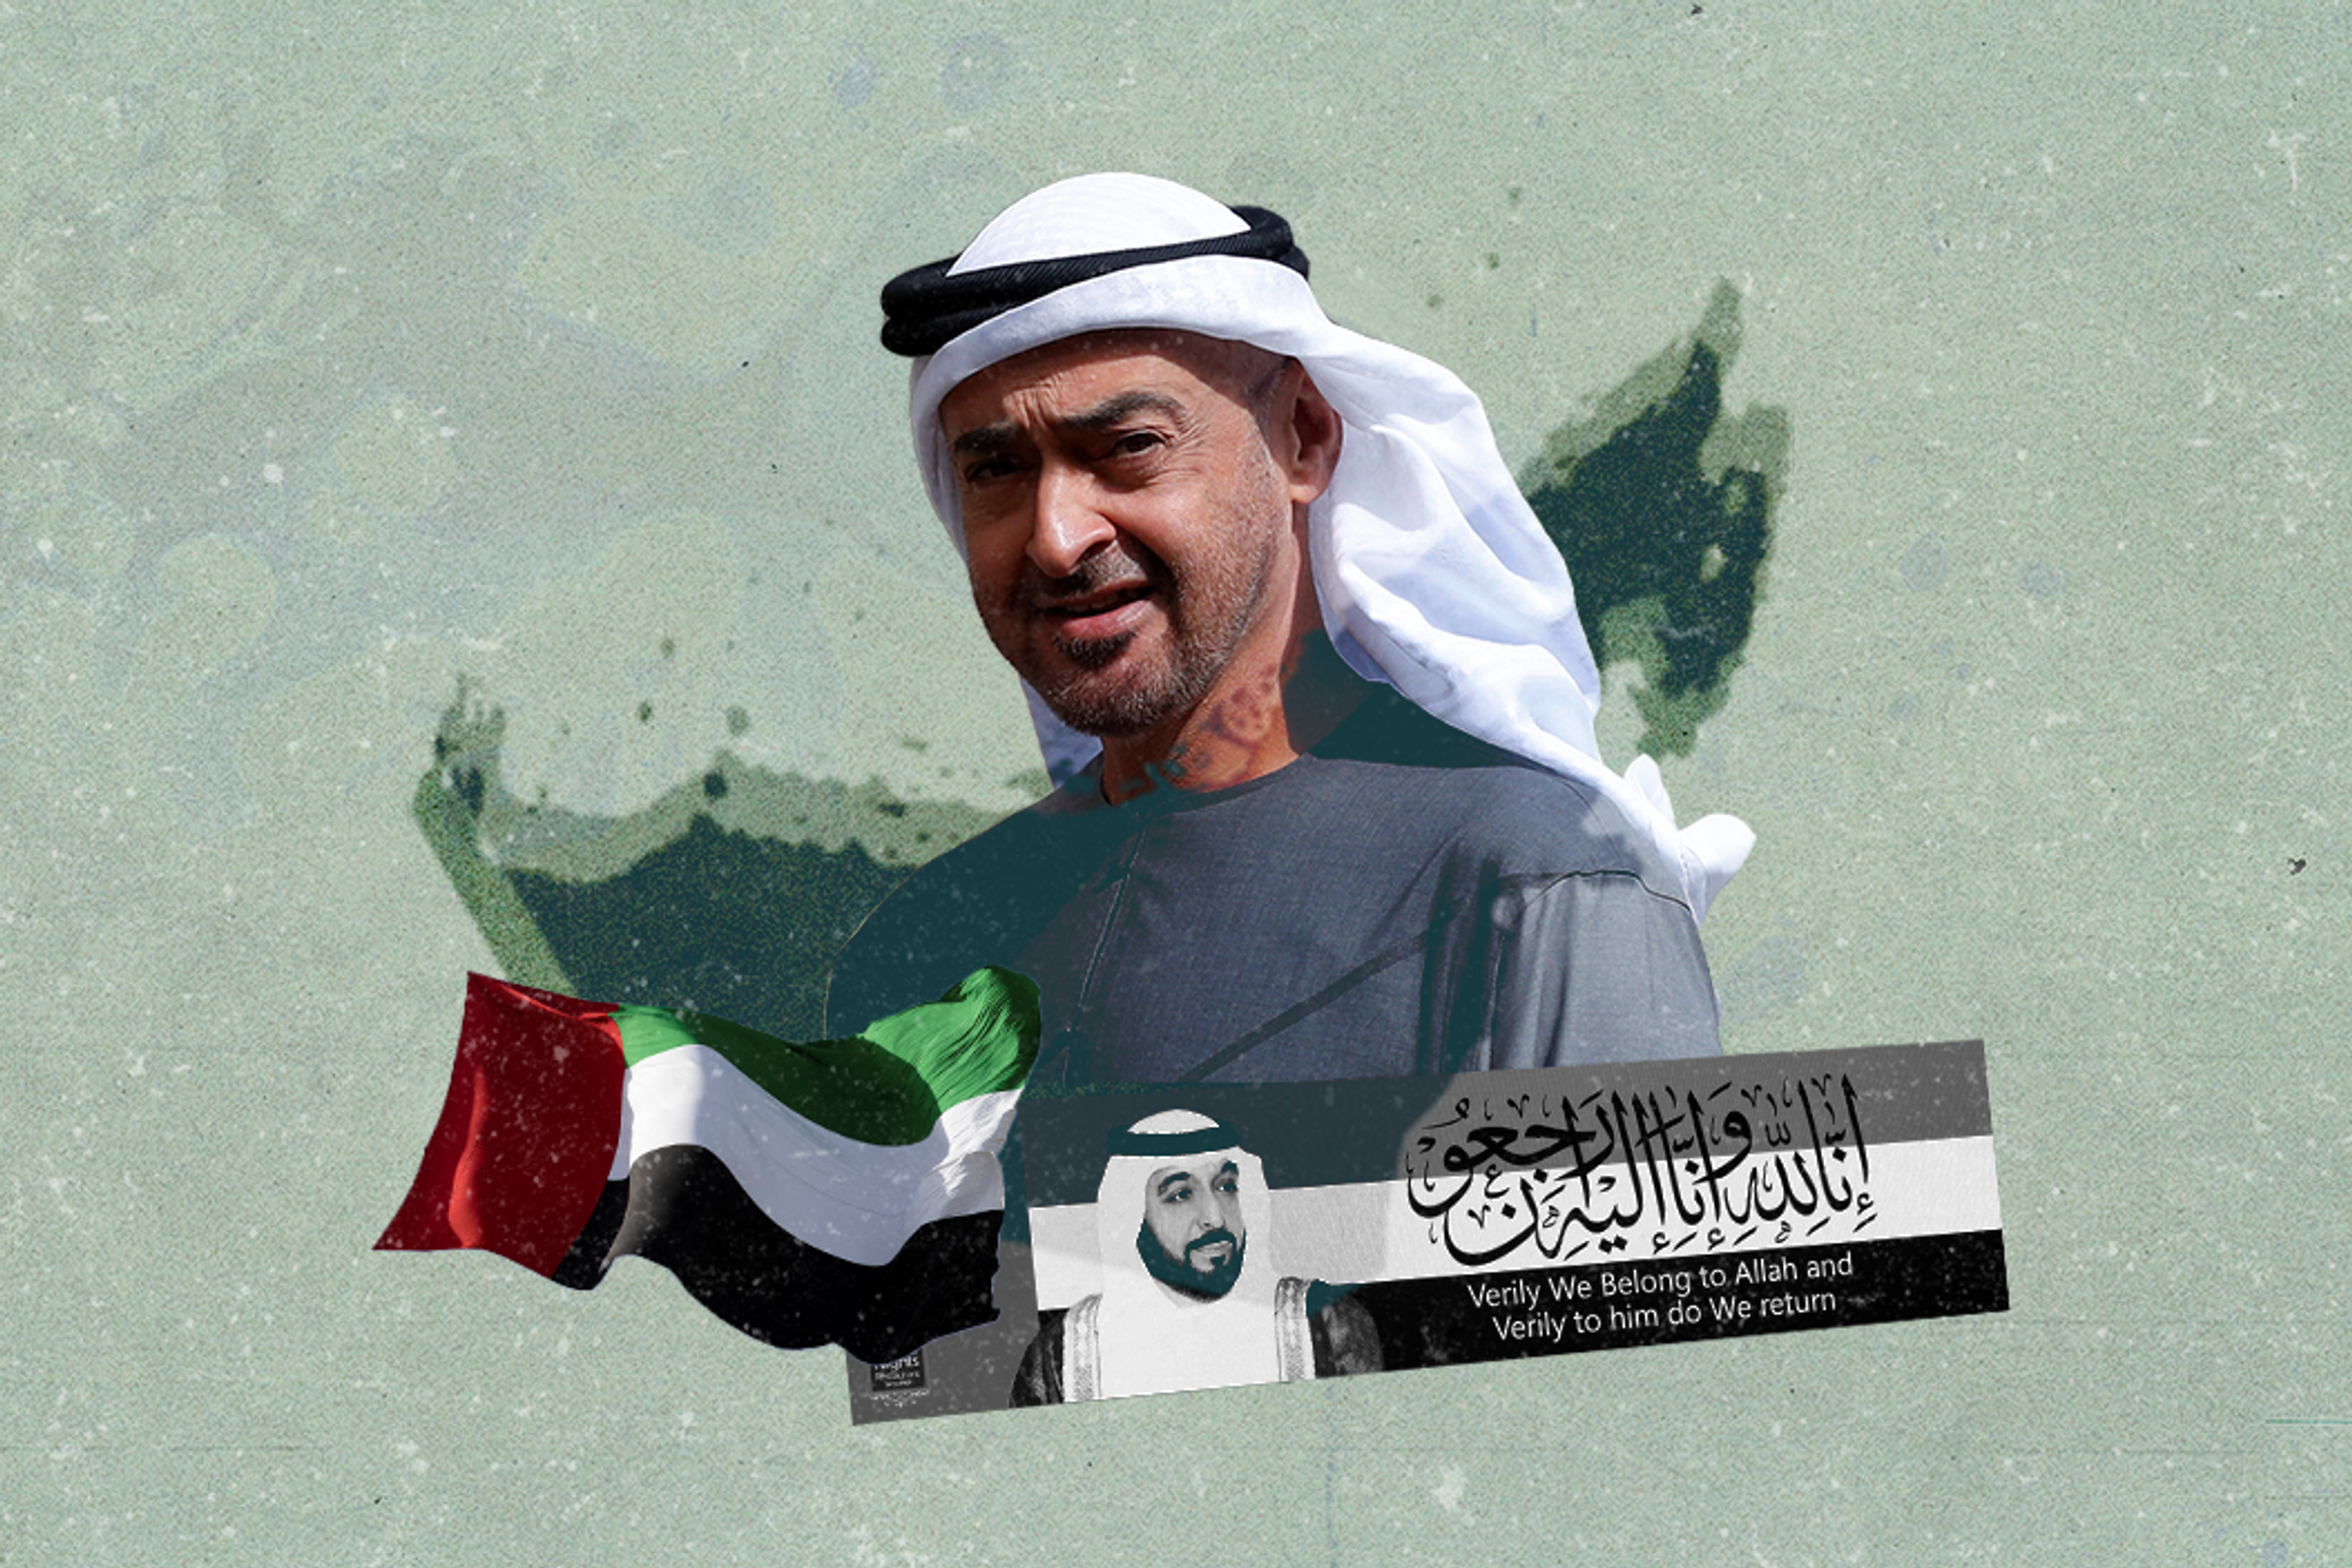 De-facto ruler no more — UAE’s new president is ambitious, sophisticated